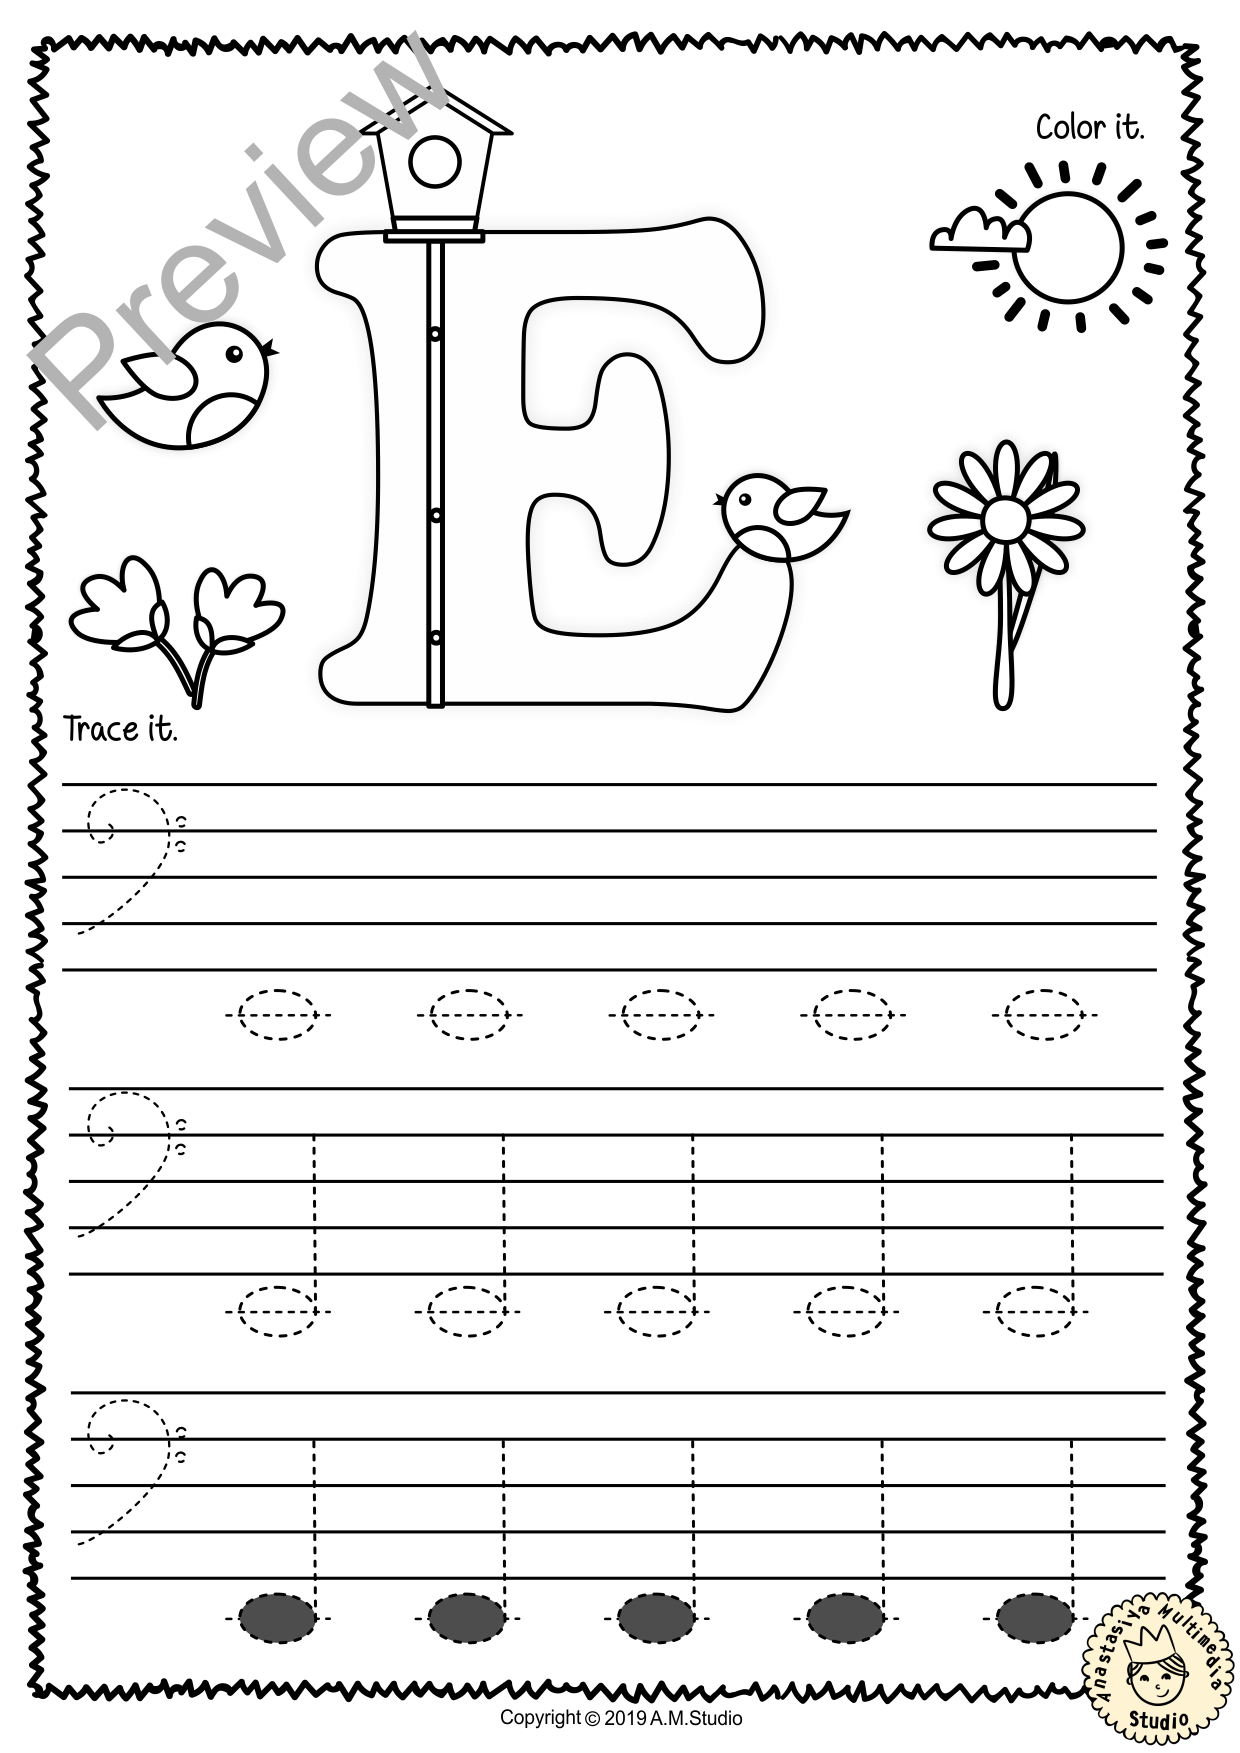 Bass Clef Tracing Music Notes Worksheets for Spring (img # 1)